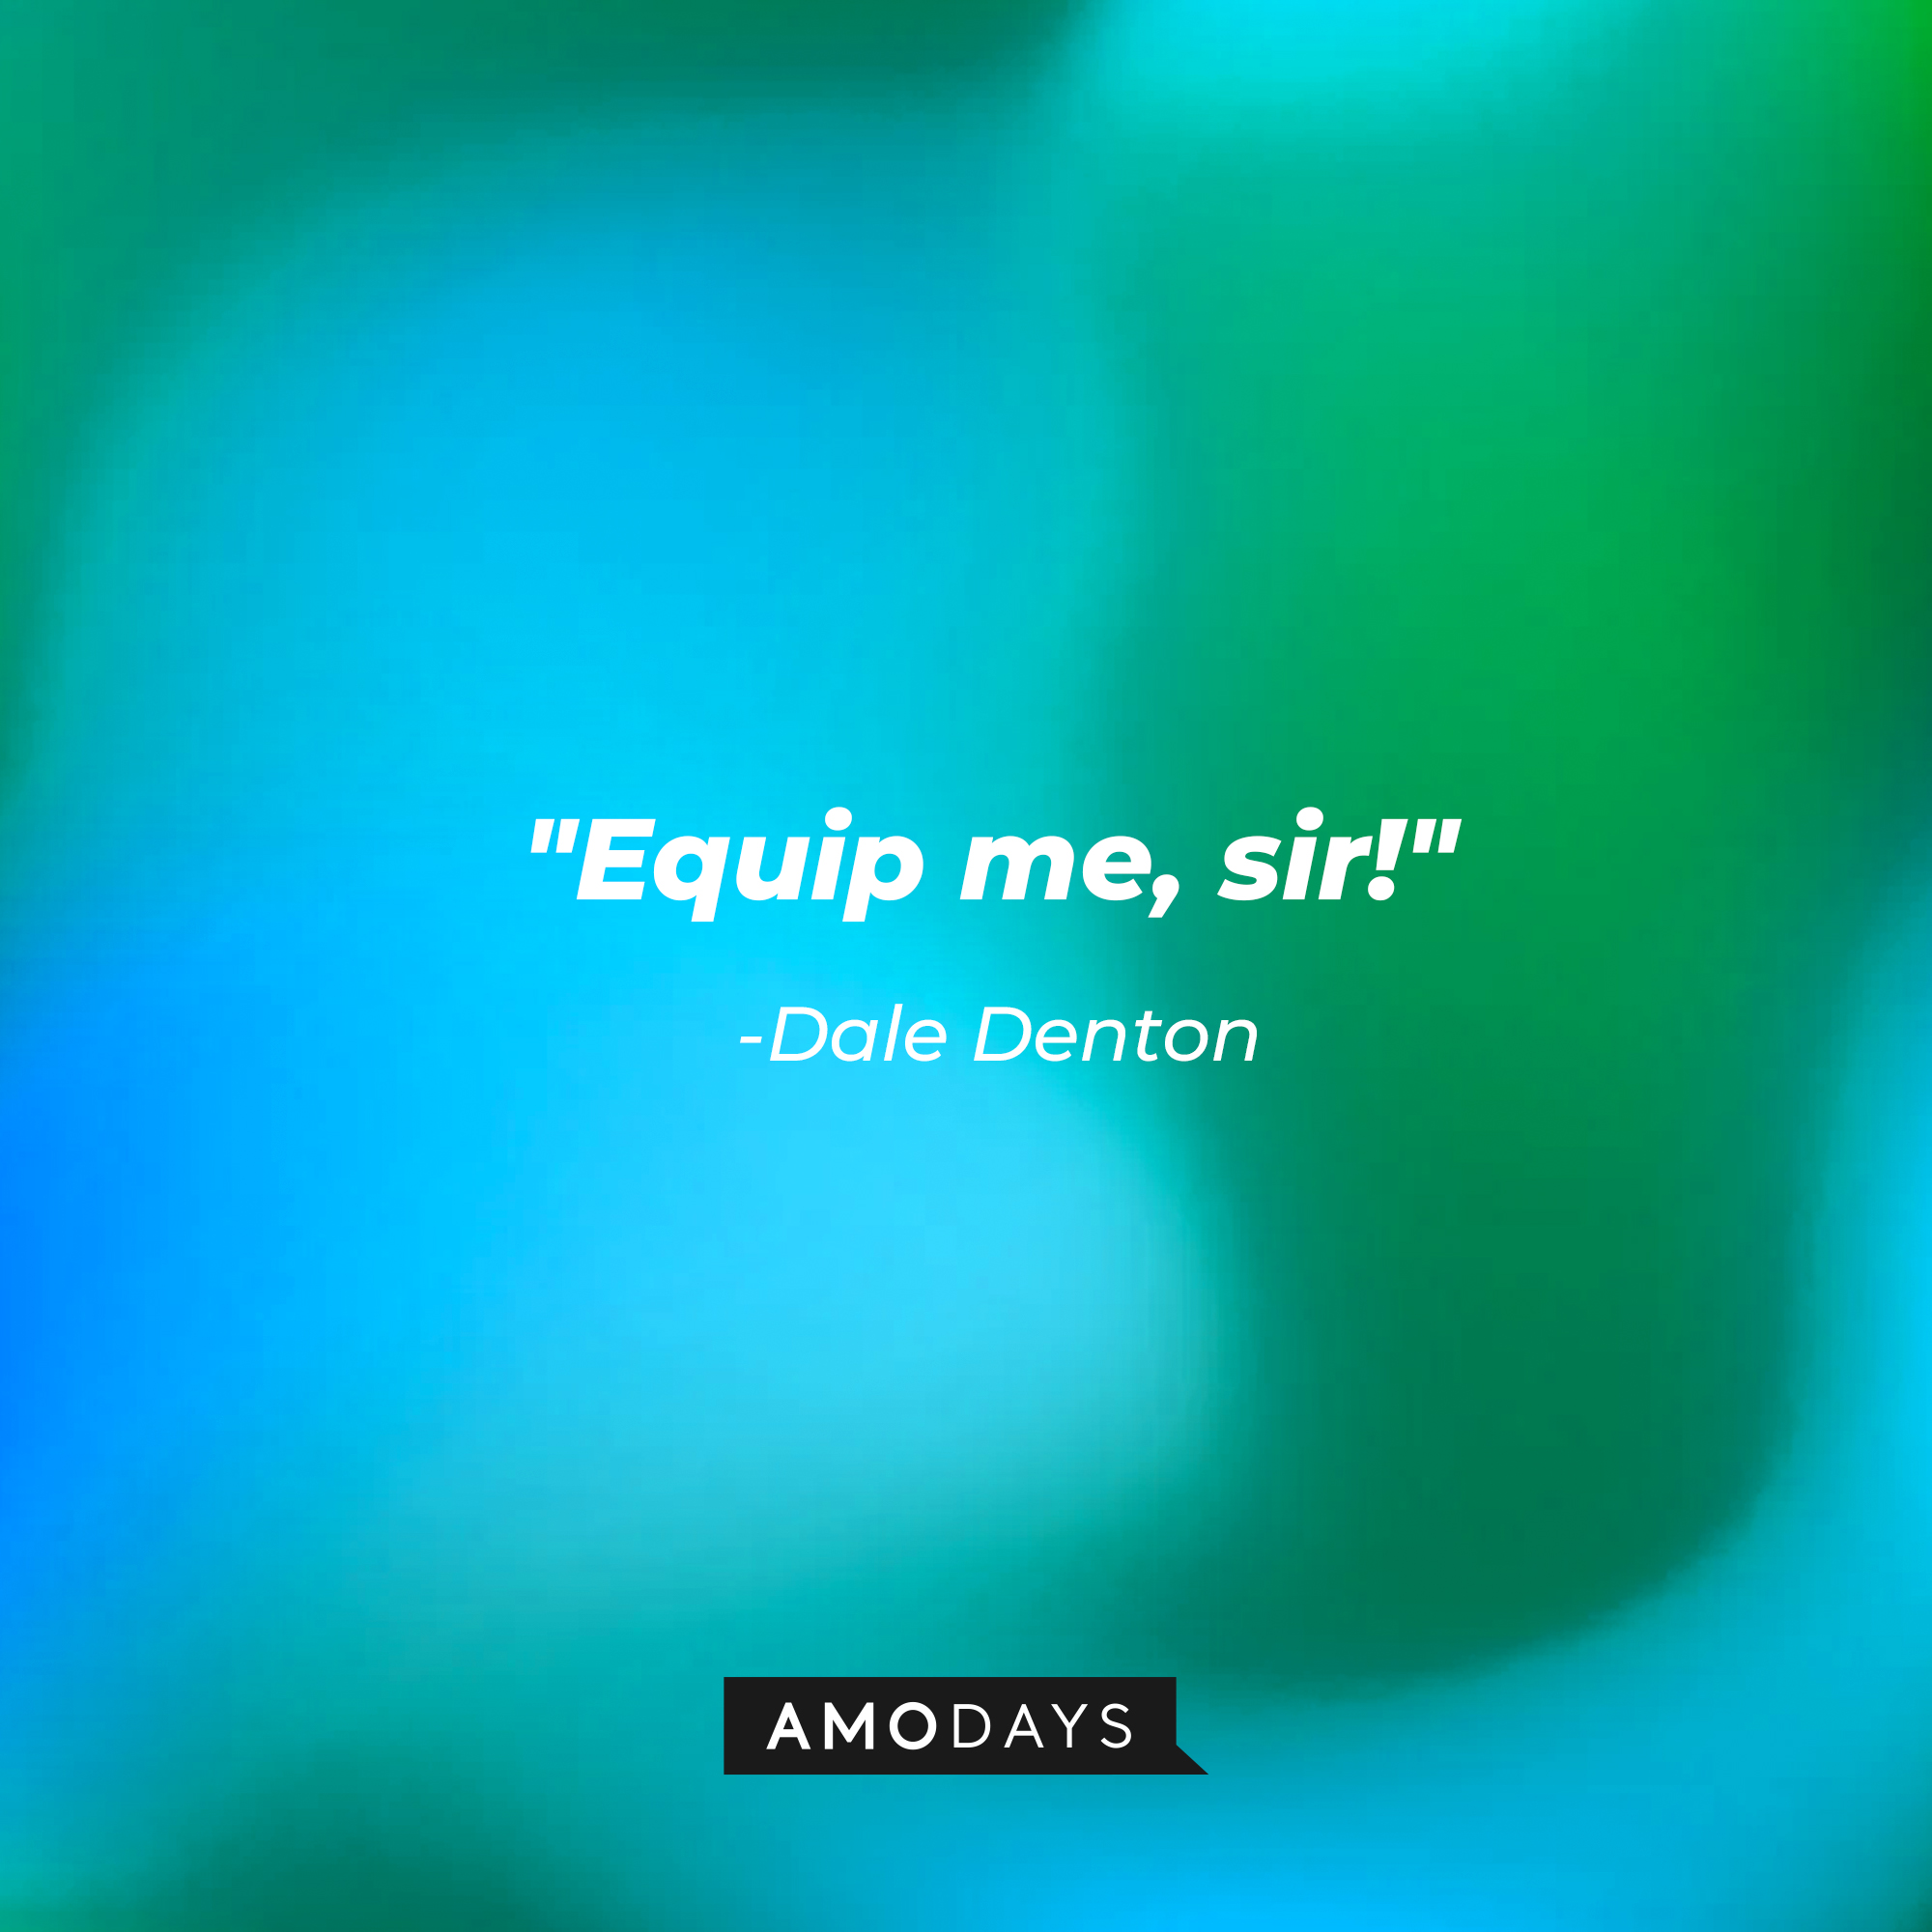 Dale Denton's quote: "Equip me, sir!" | Source: AmoDays